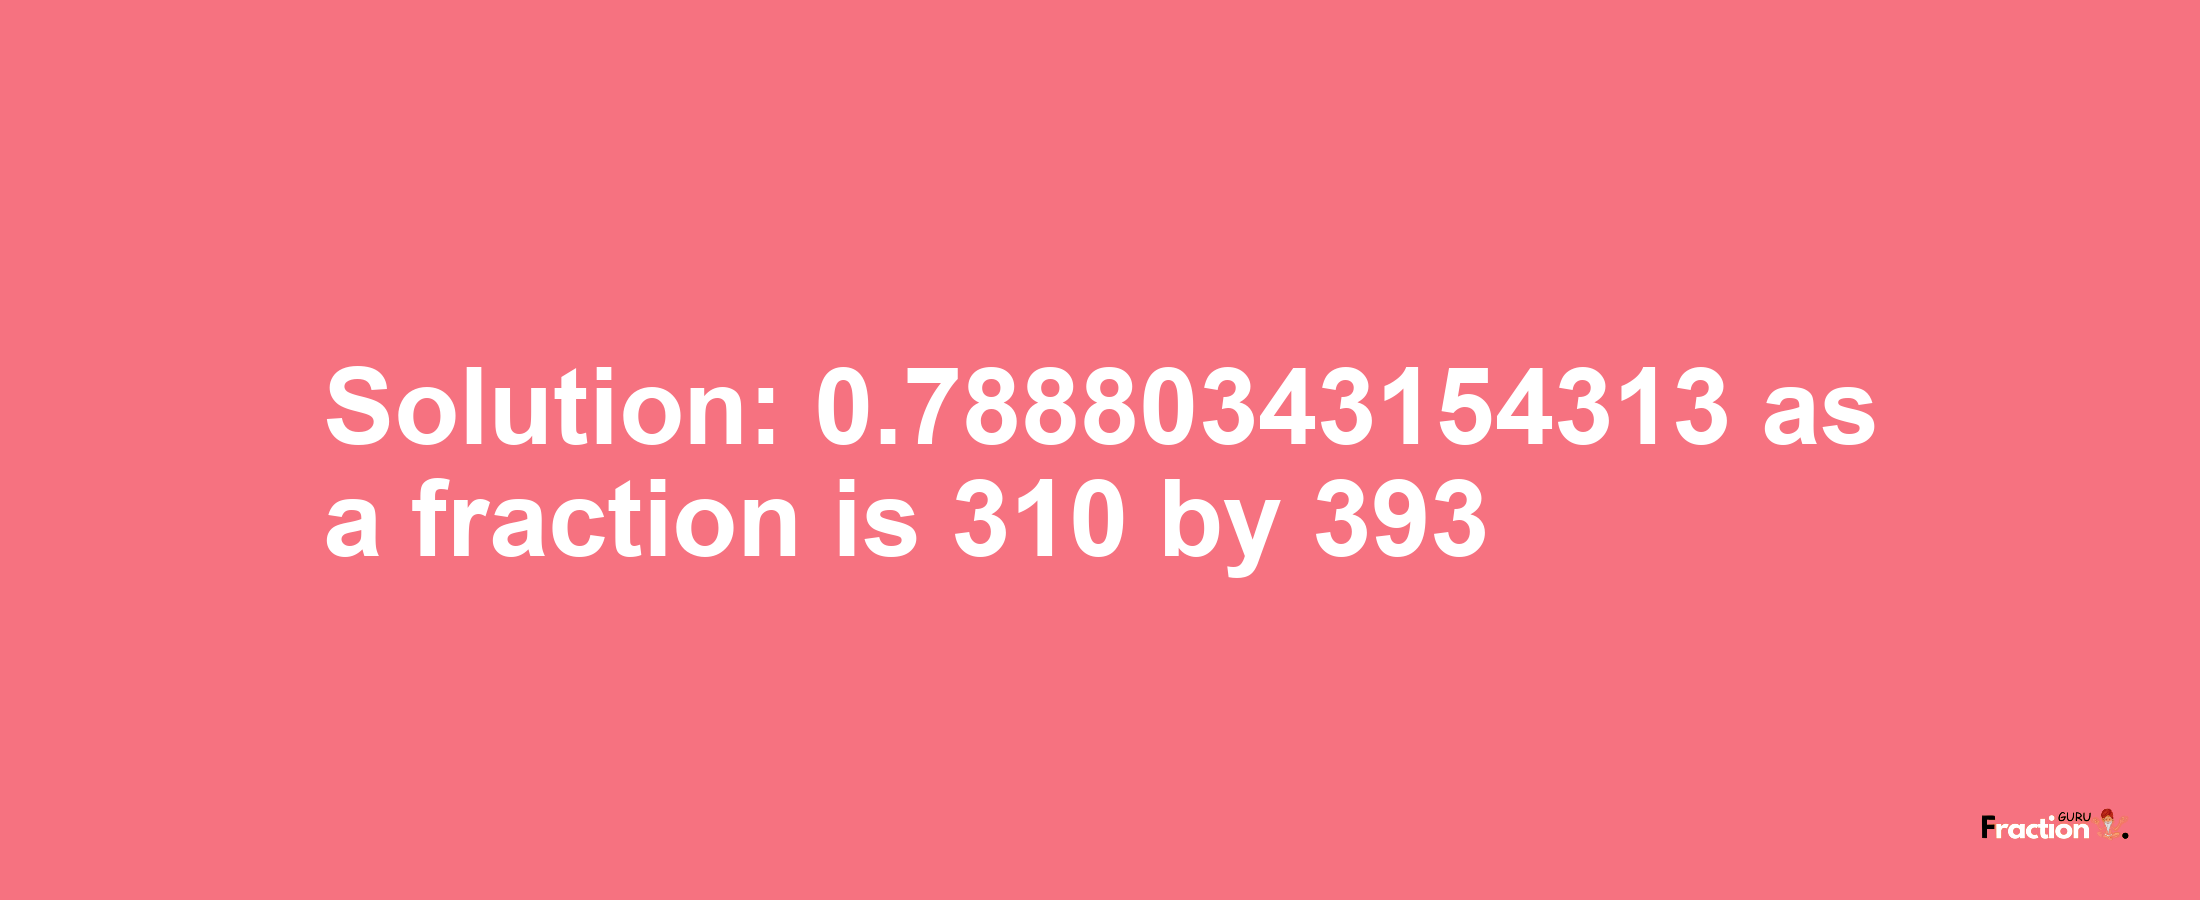 Solution:0.78880343154313 as a fraction is 310/393